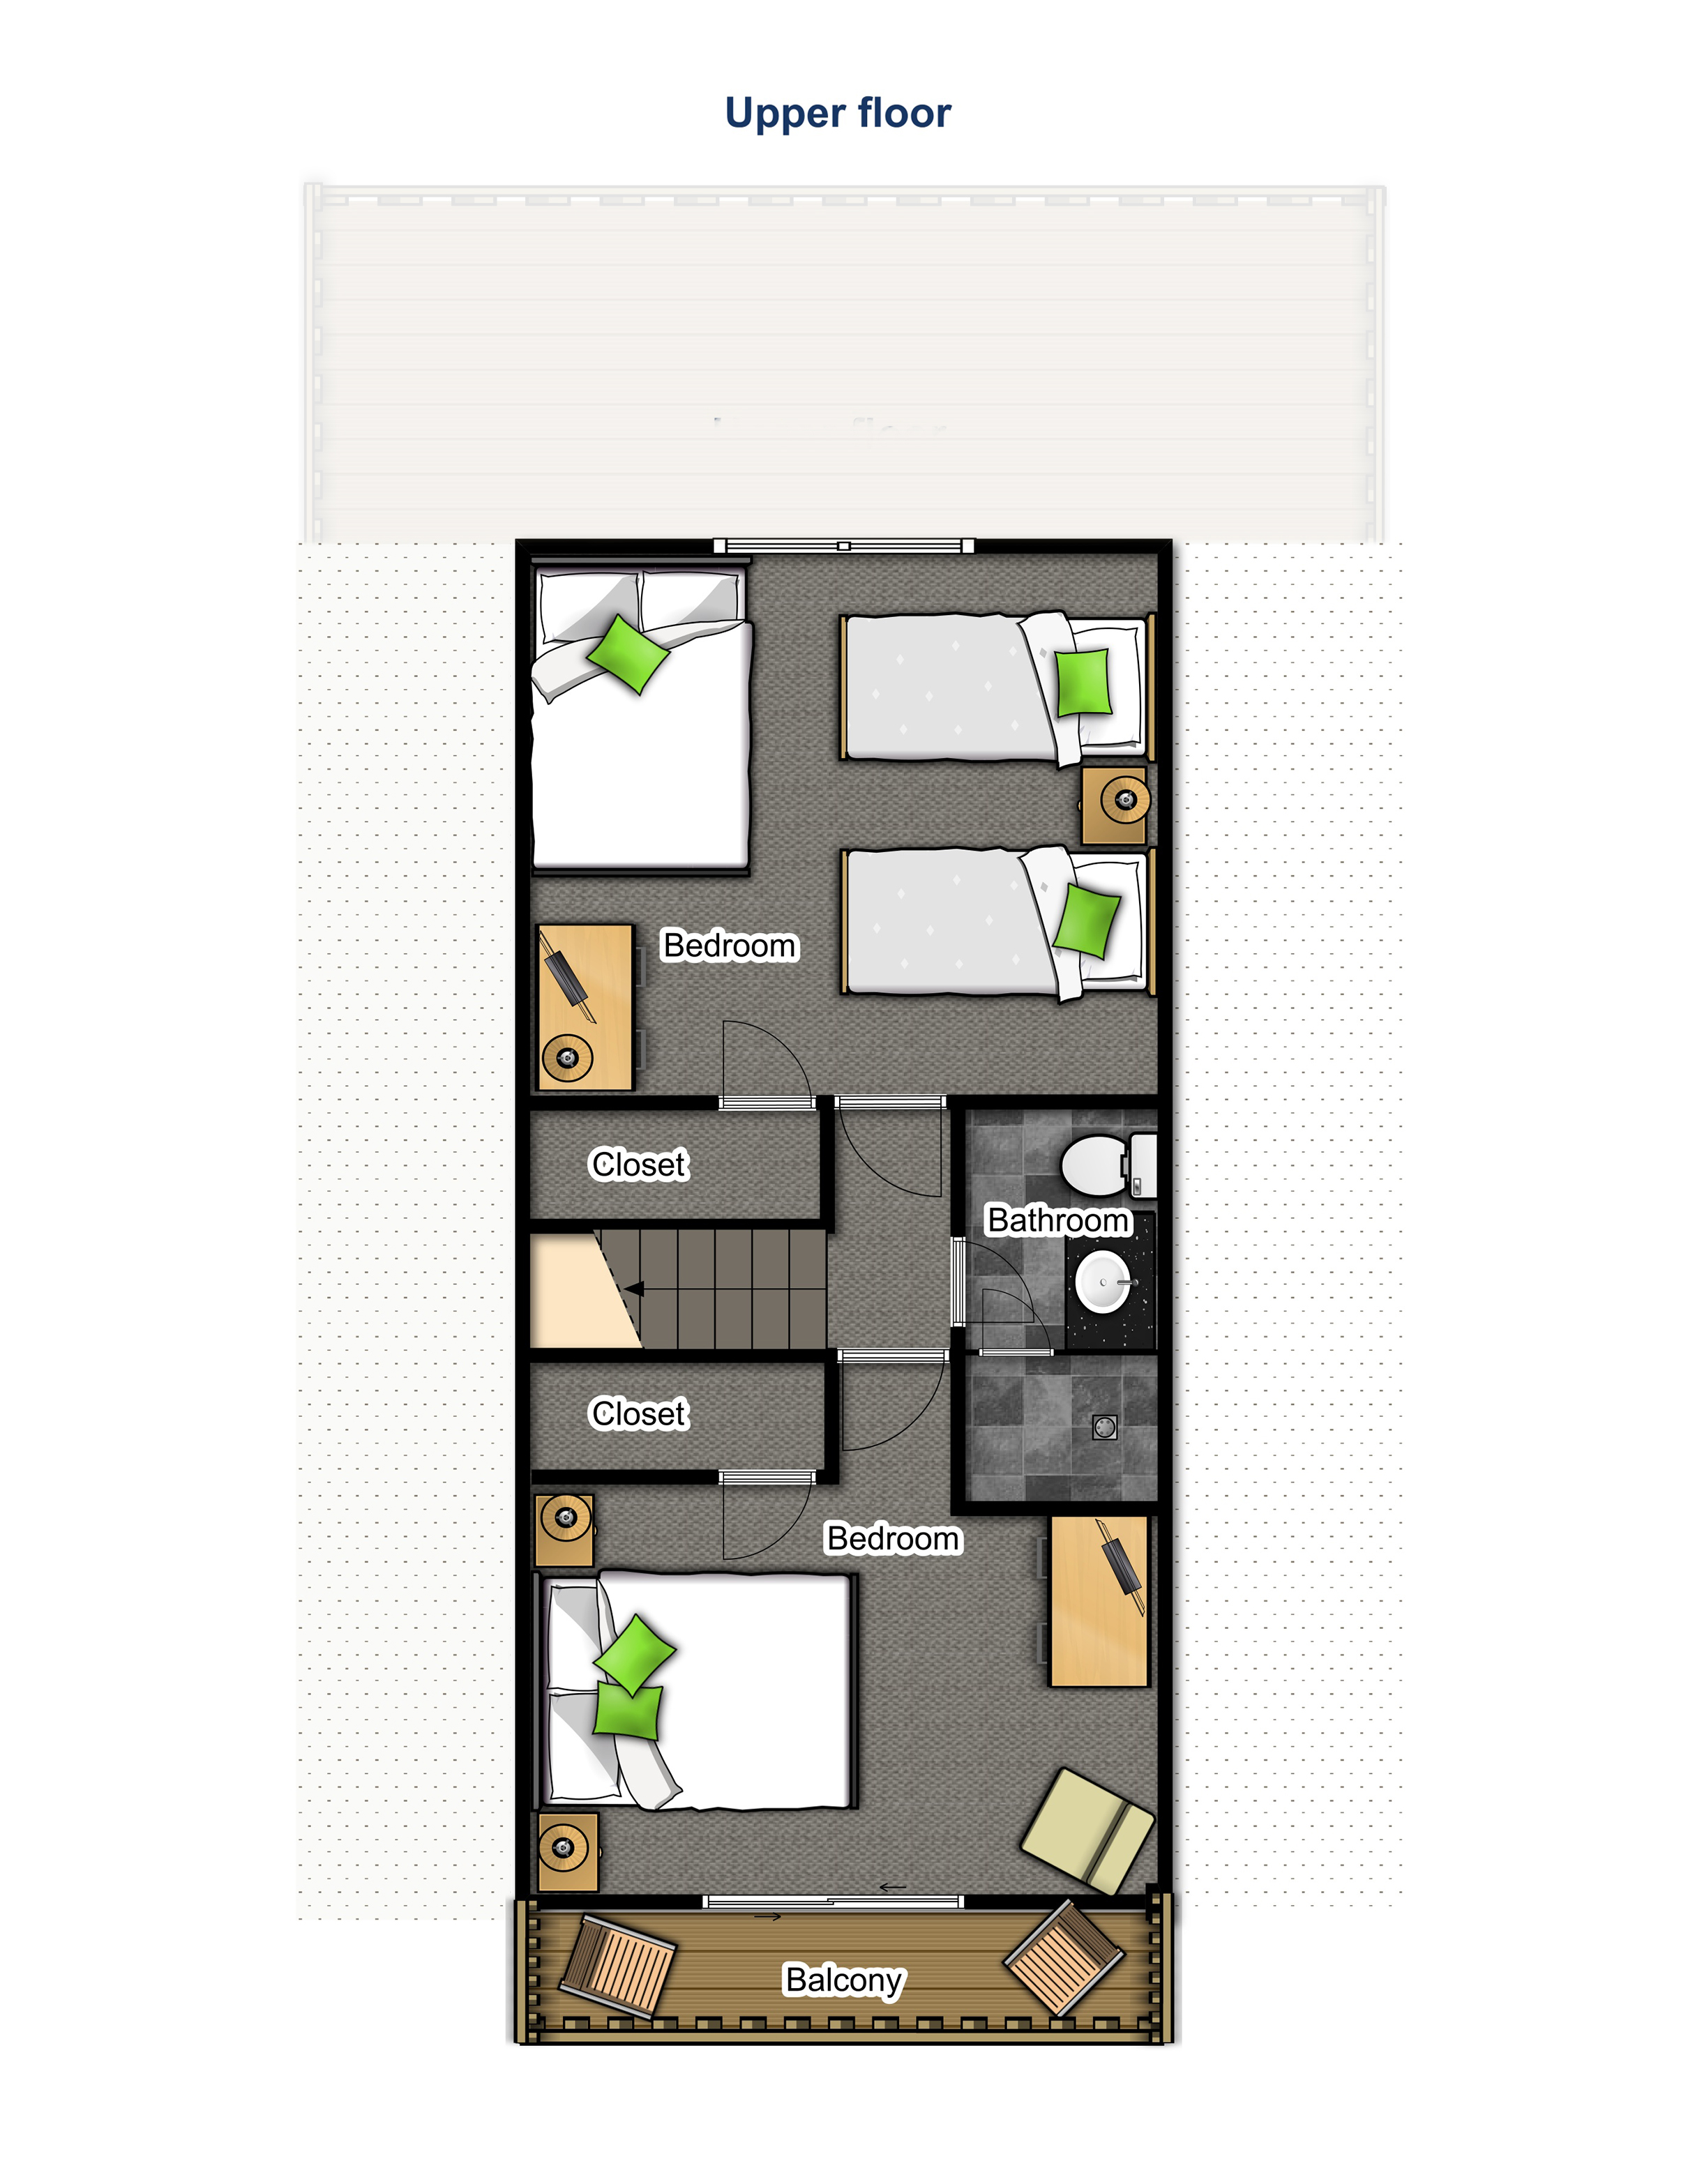 Upper floor — two bedrooms and a bathroom